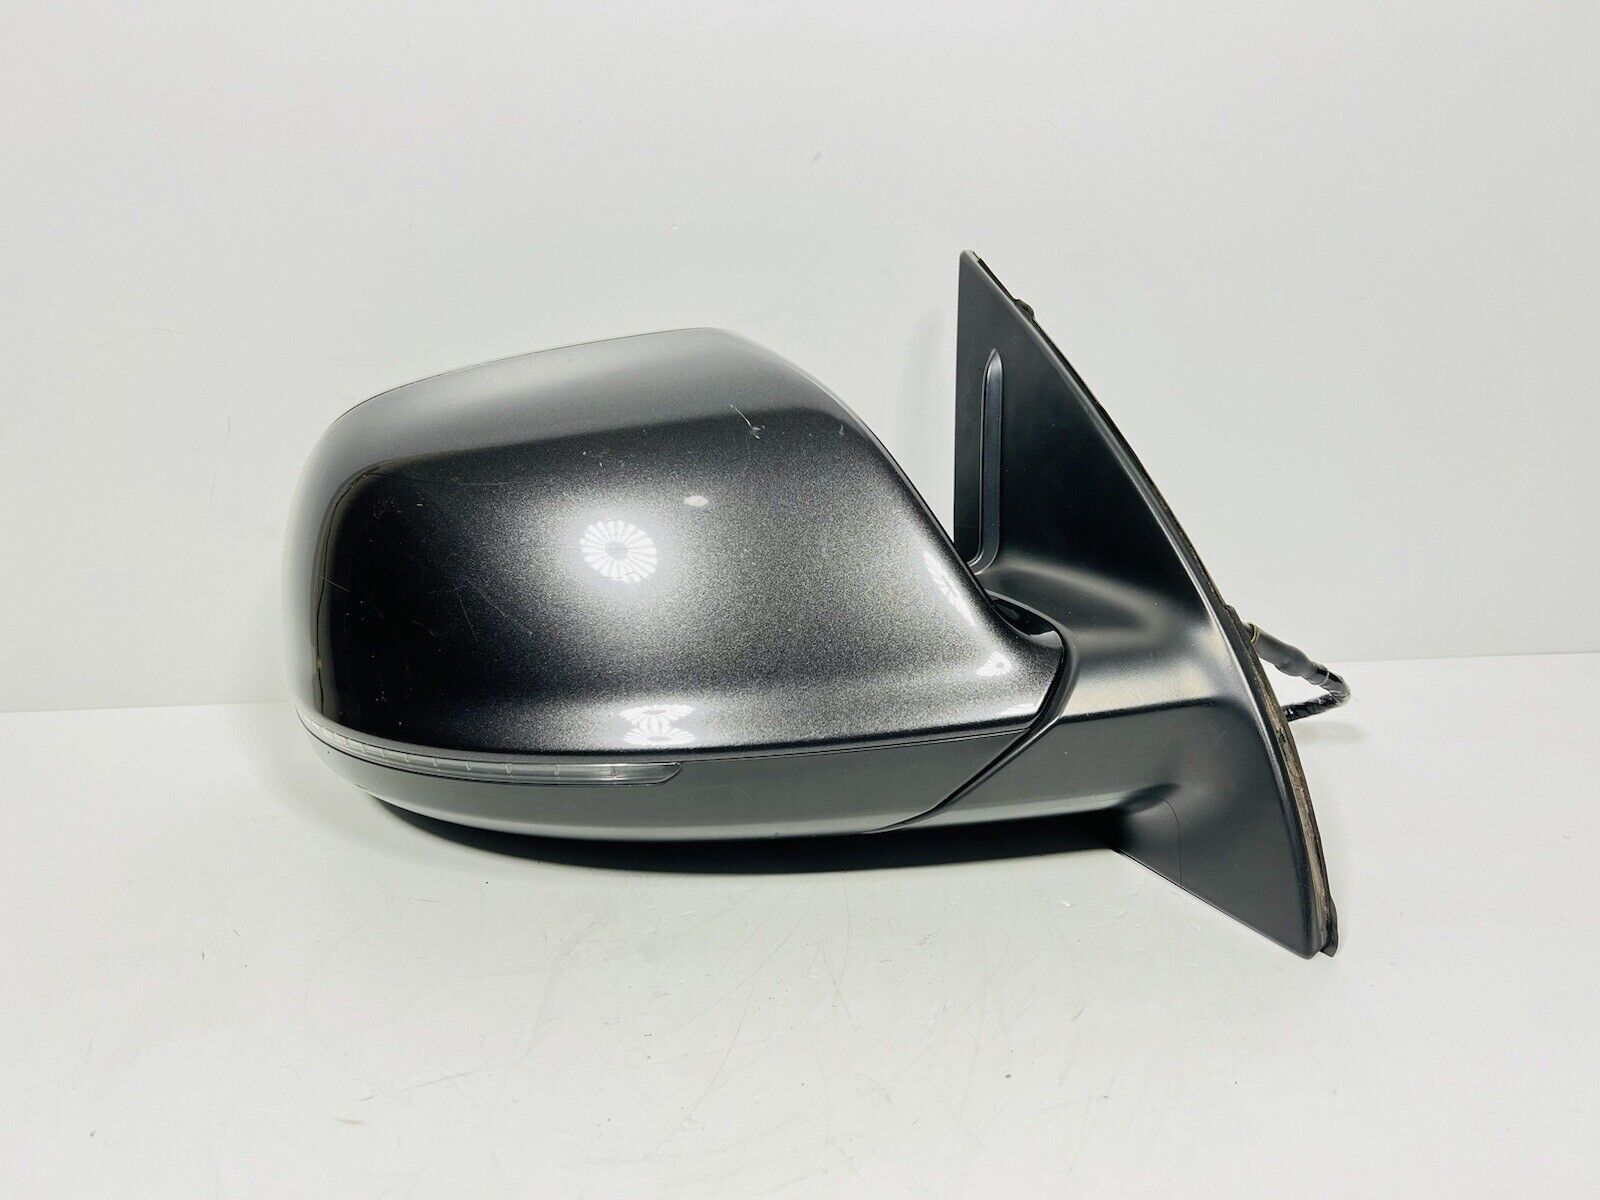 2009-2014 Audi Q5 Right Passenger Side View Mirror Used OEM. W Blind Spot